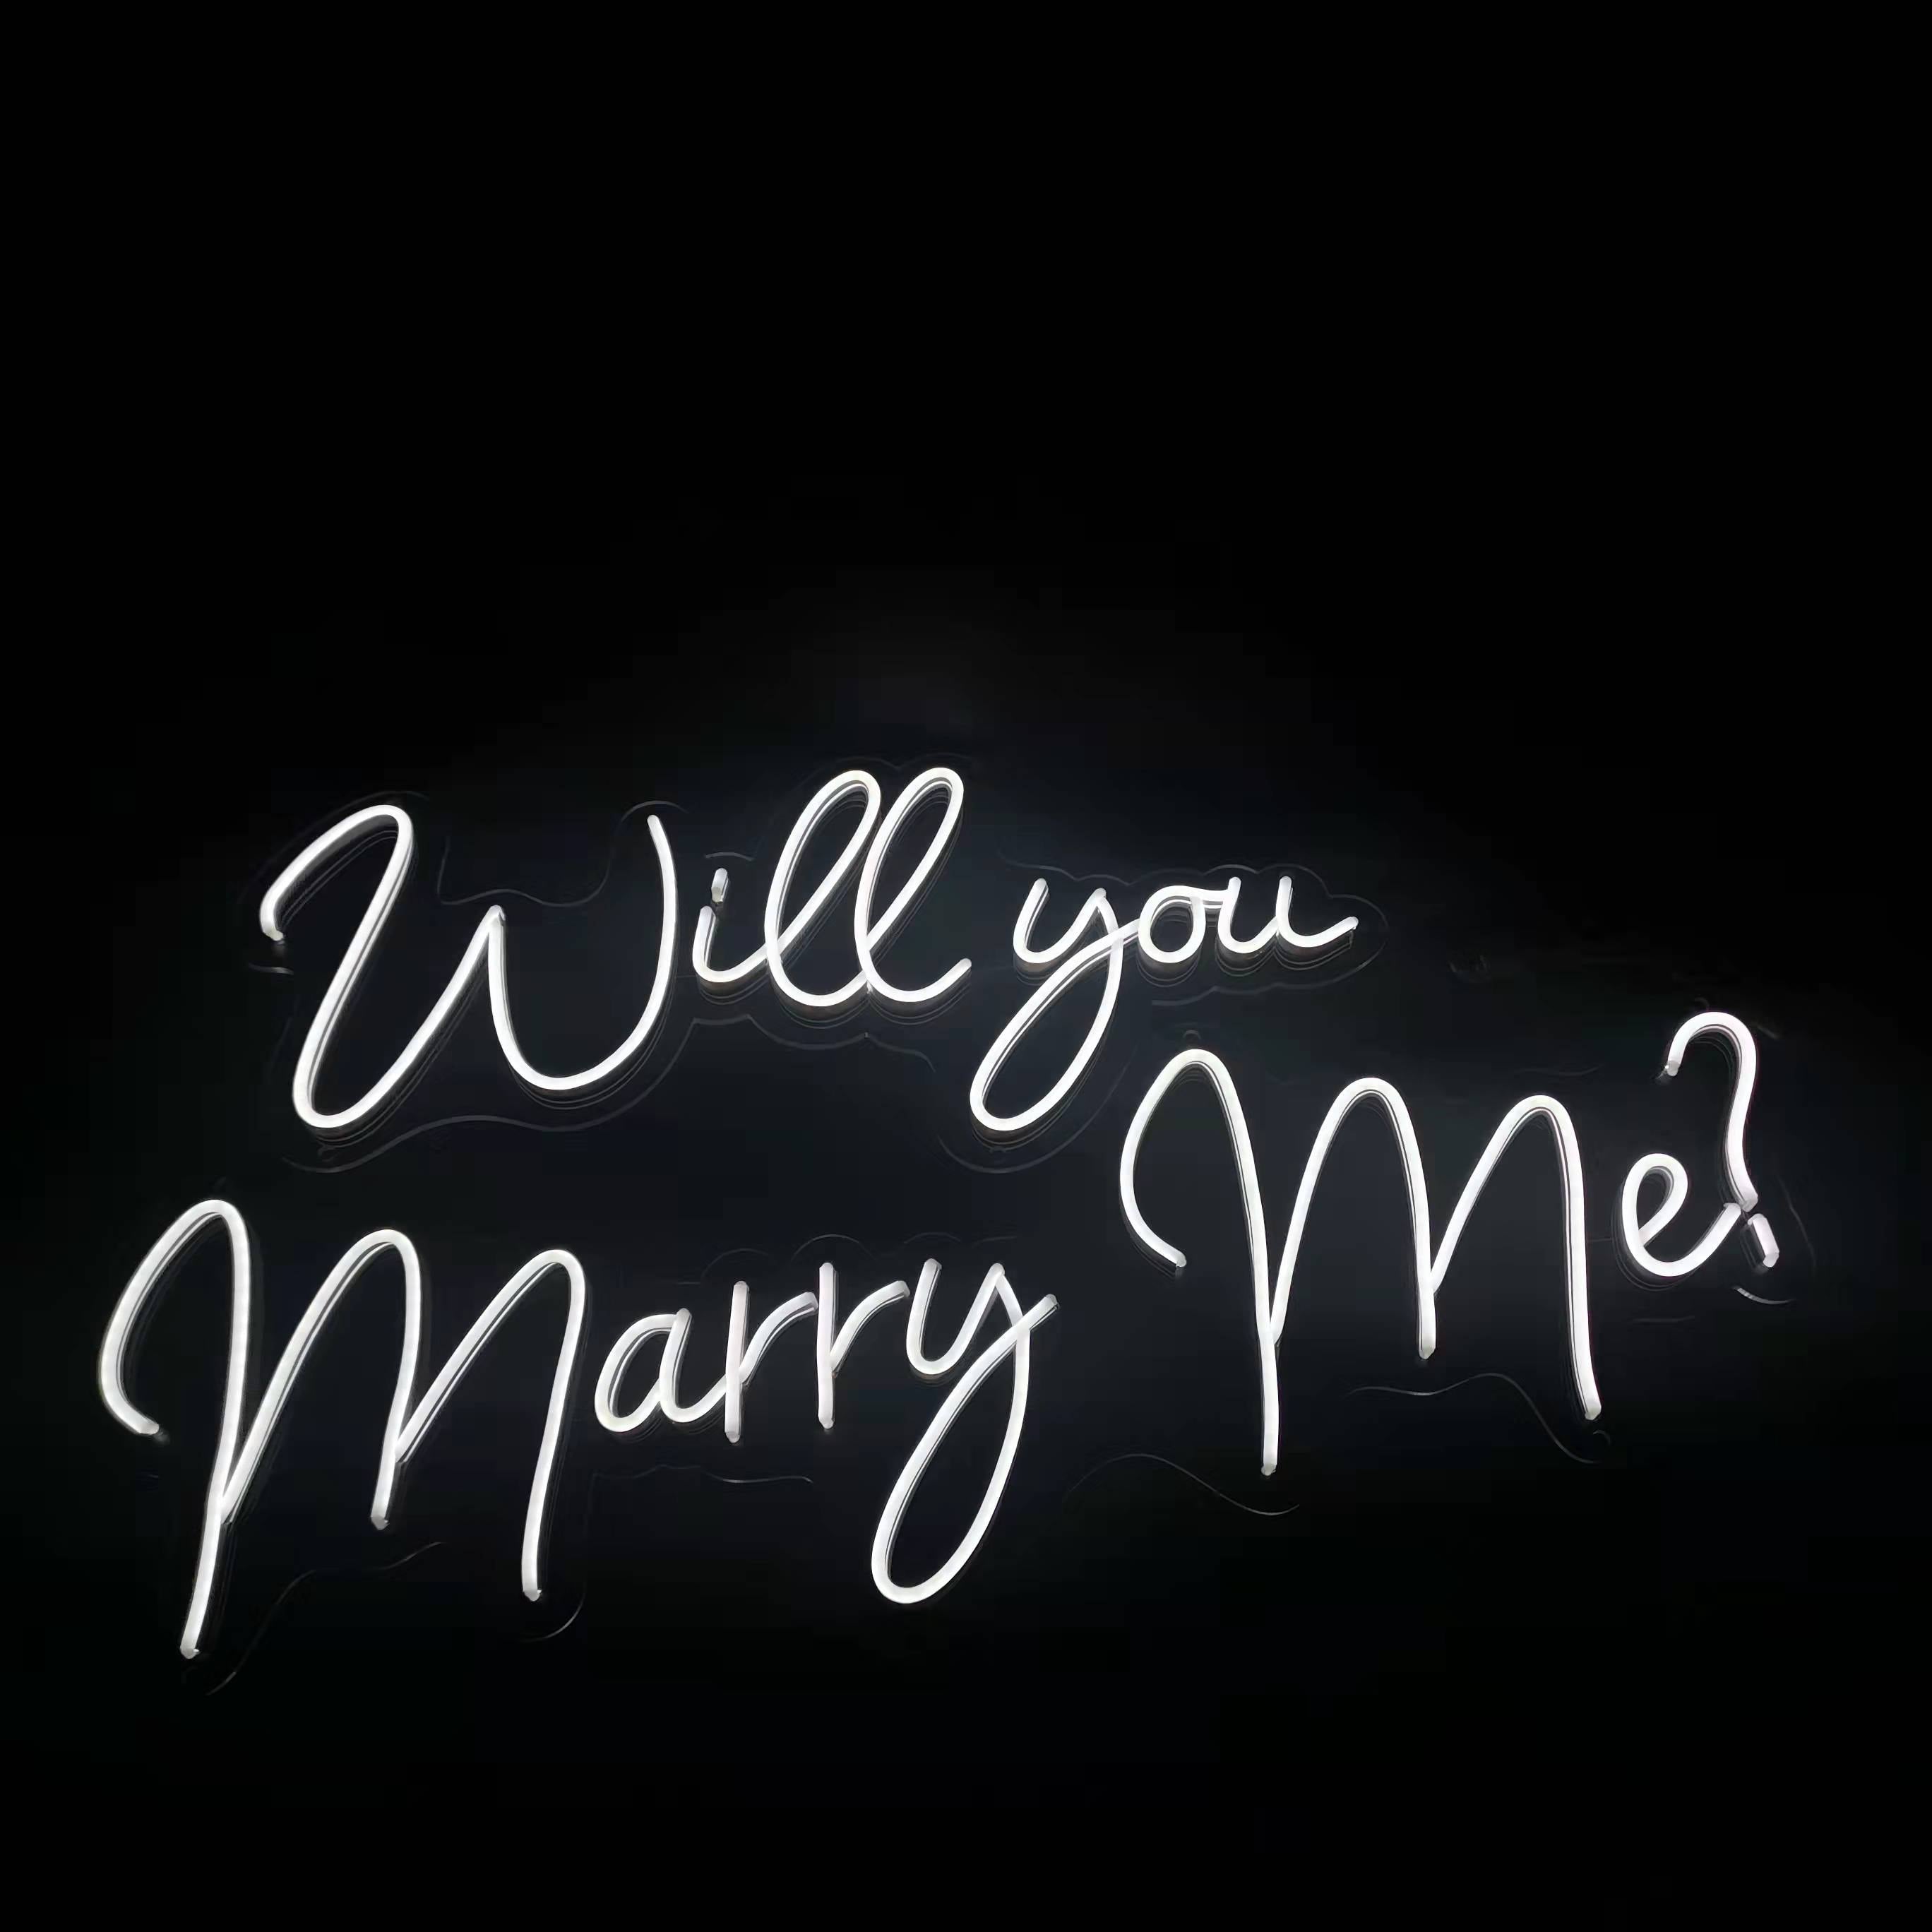 will you marry me images